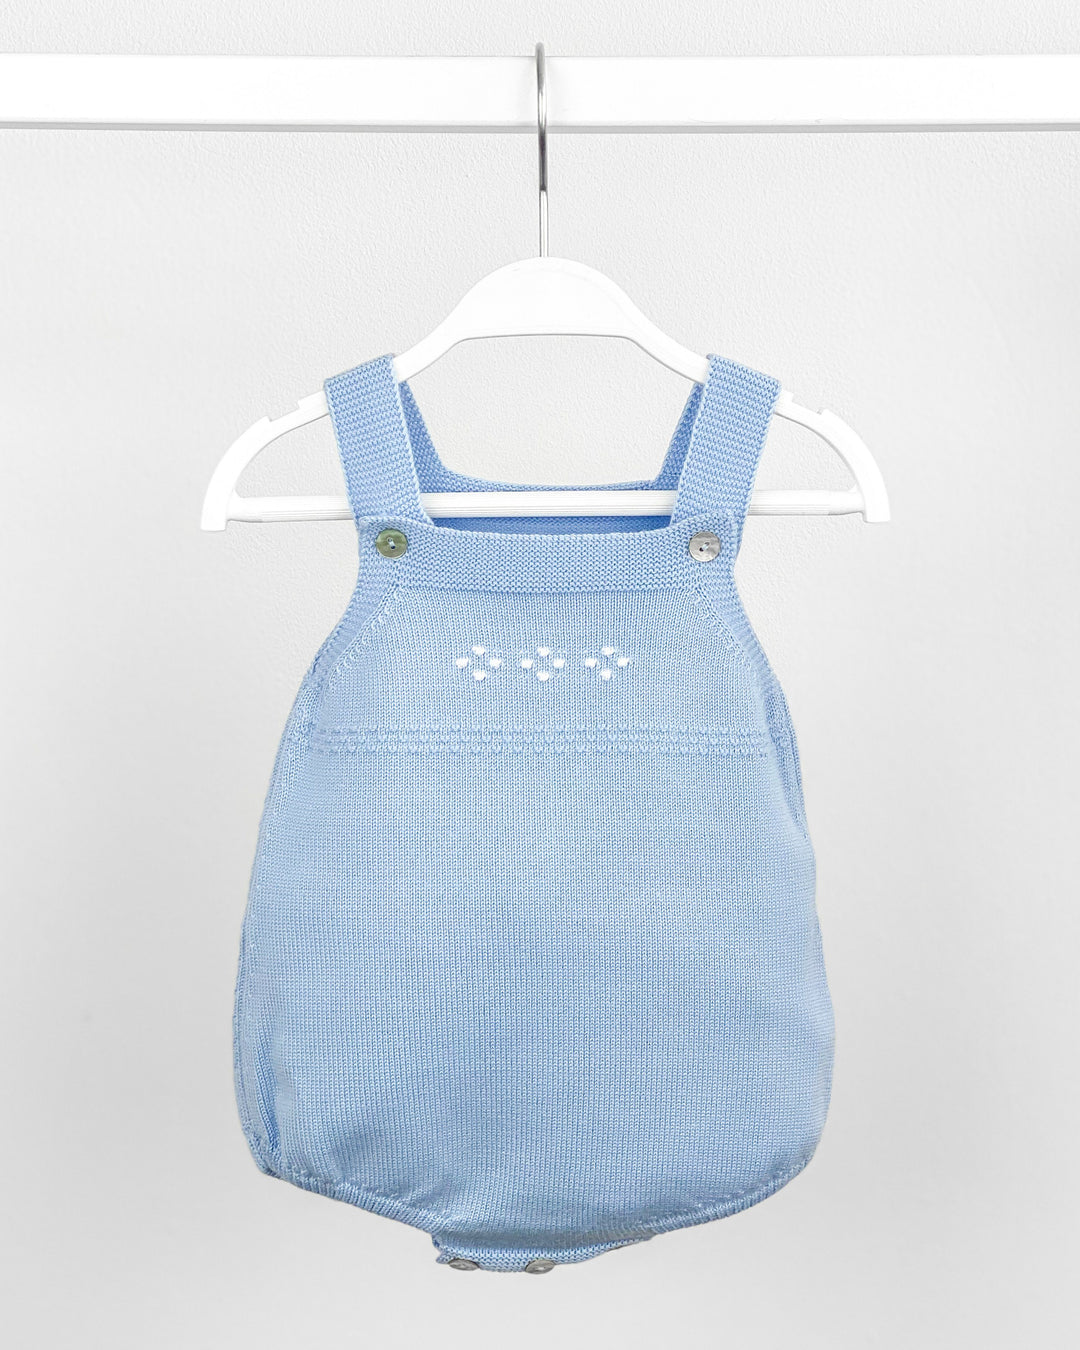 Granlei Classic Knitted Dungaree Romper - Sky Blue | Millie and John